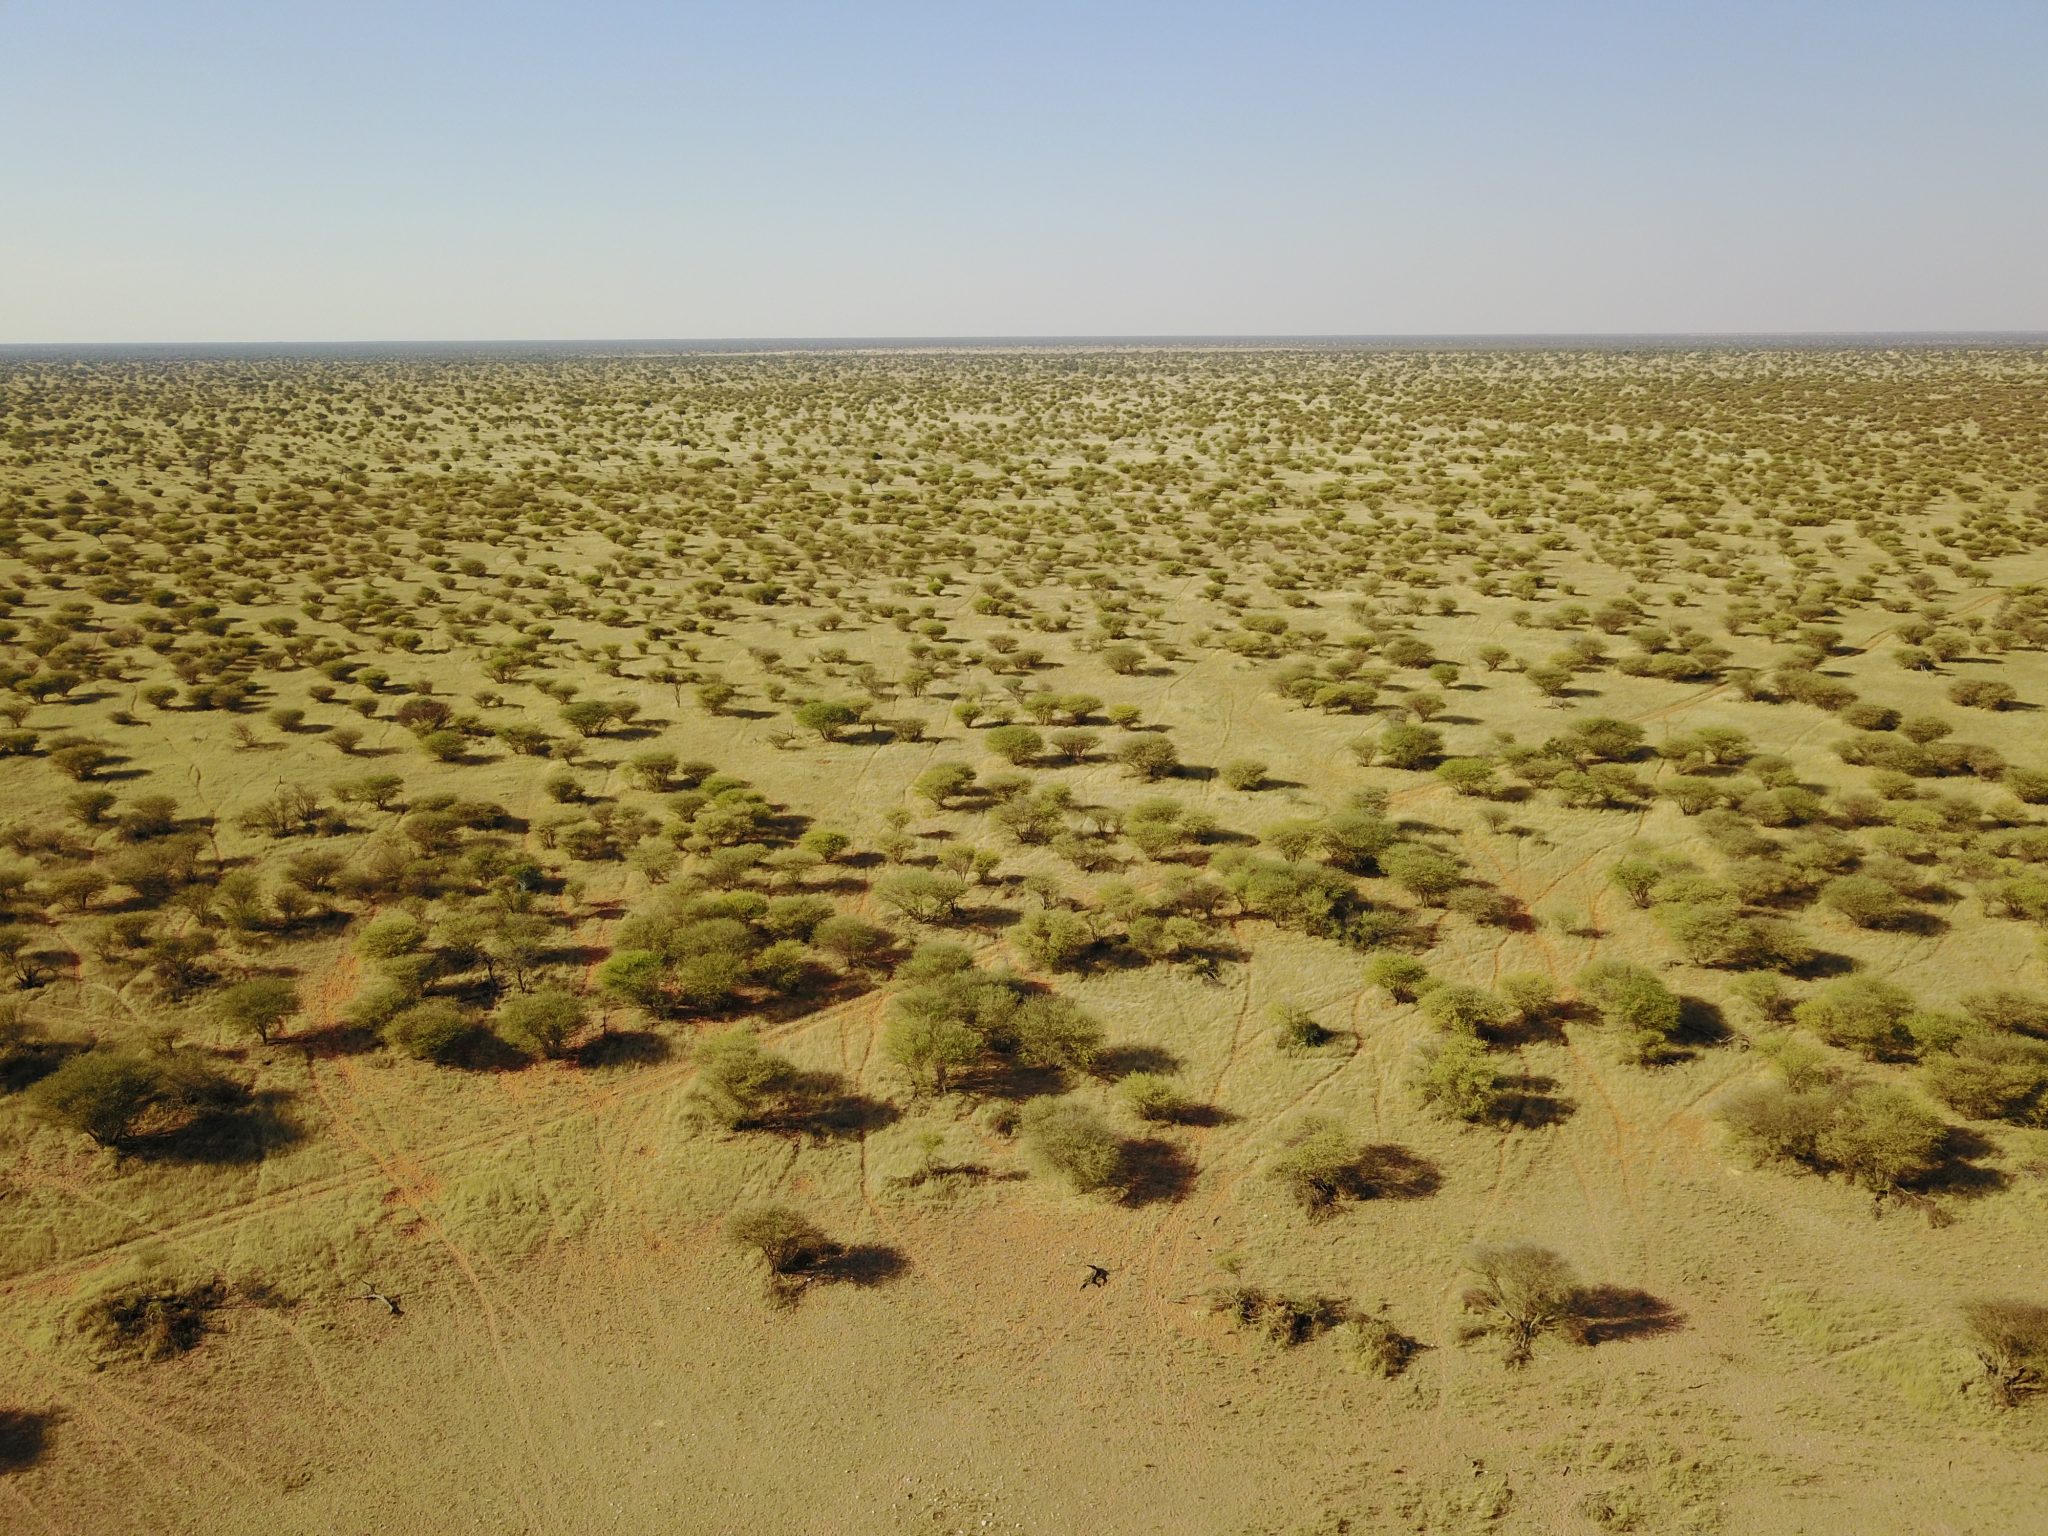 An aerial view of the central Namibian plateau.